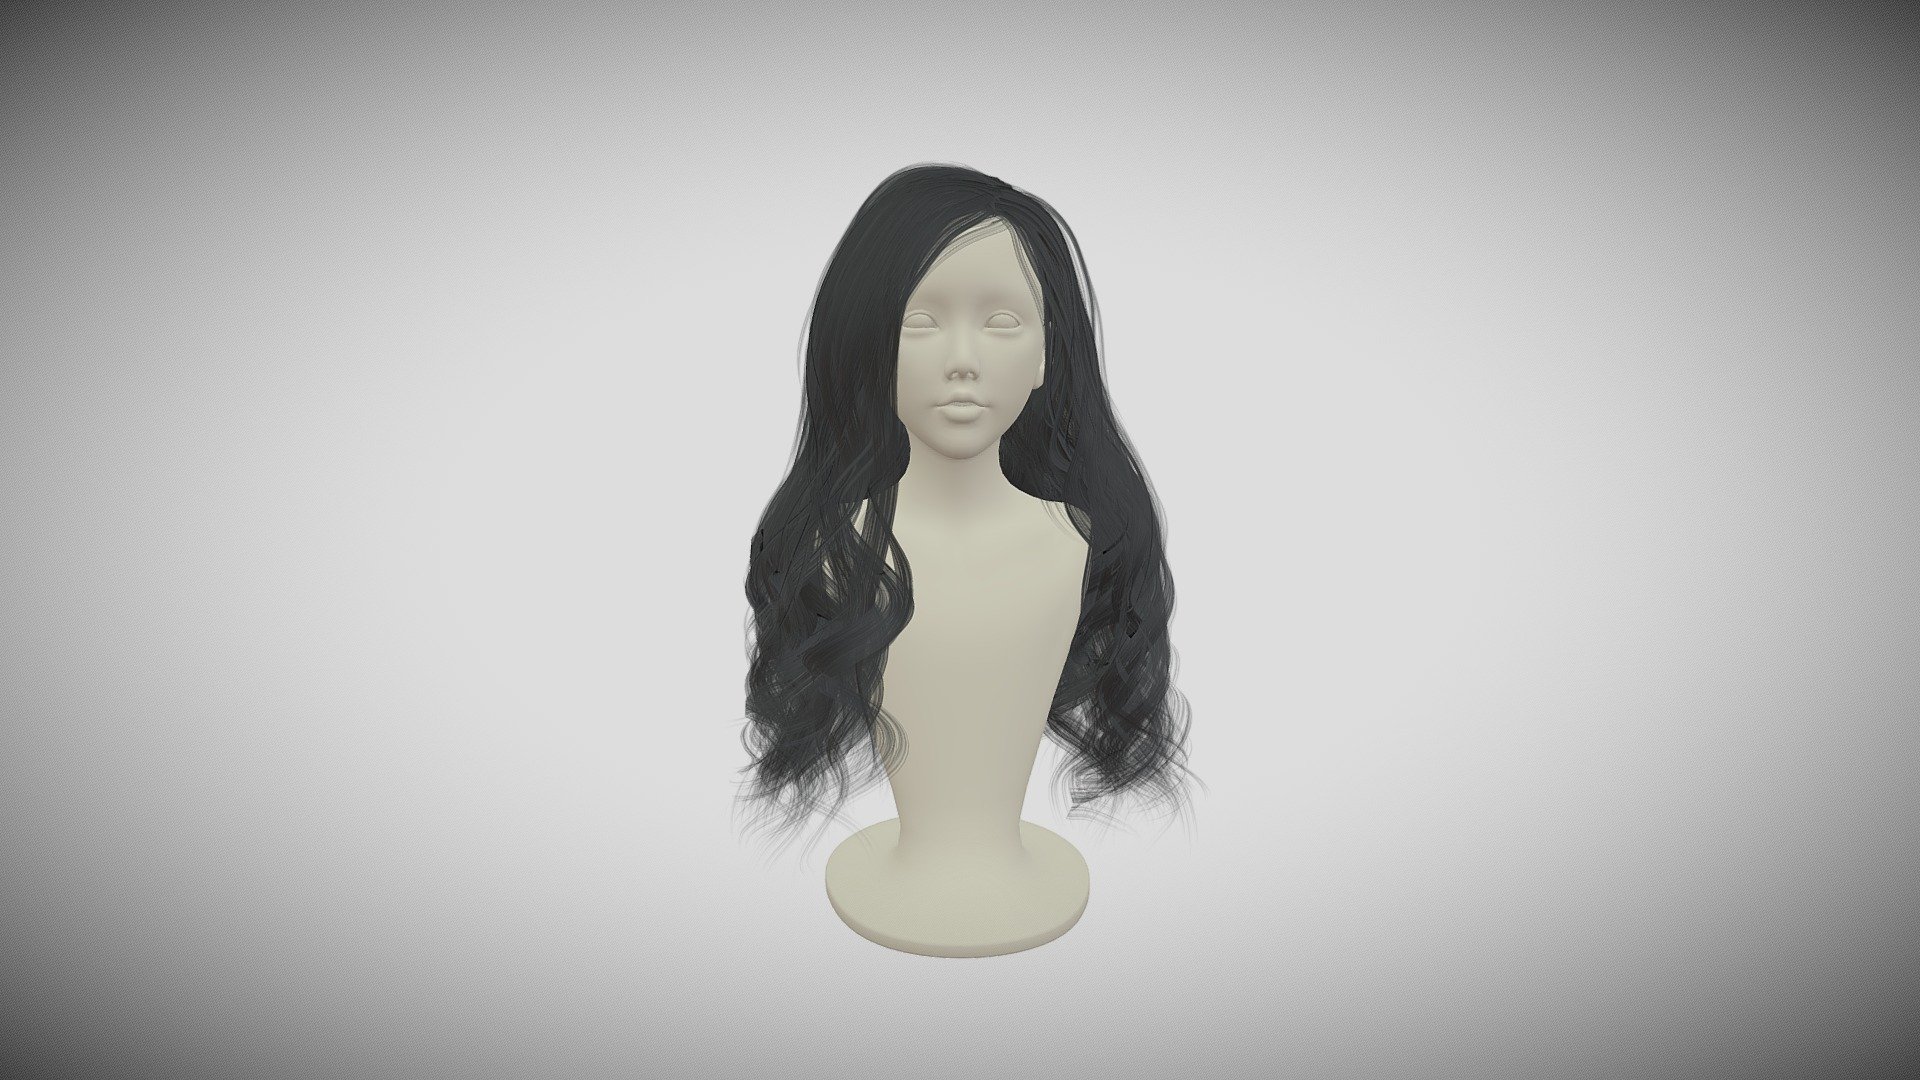 Real Time Hairstyle optimized for Games.

You can easily change the color of the hair.

It is made in Blender 3.6 (EEVEE Render) ,Cycles rendering is also available.

Hair Texture: 4096; Including Alpha, Depth, ID, Root, Basecolor, Random Color , Normal, Flow, AO, Directional.

Vertices:54414; Edges:90090; Faces:35876; Triangles:71752.

The Hairstyle has a simple and easy-to-edit mesh, and a variety of 4K textures, and you can easily use it in other softwares.

You can use it for personal and commercial projects, educations, games and movies 3d model